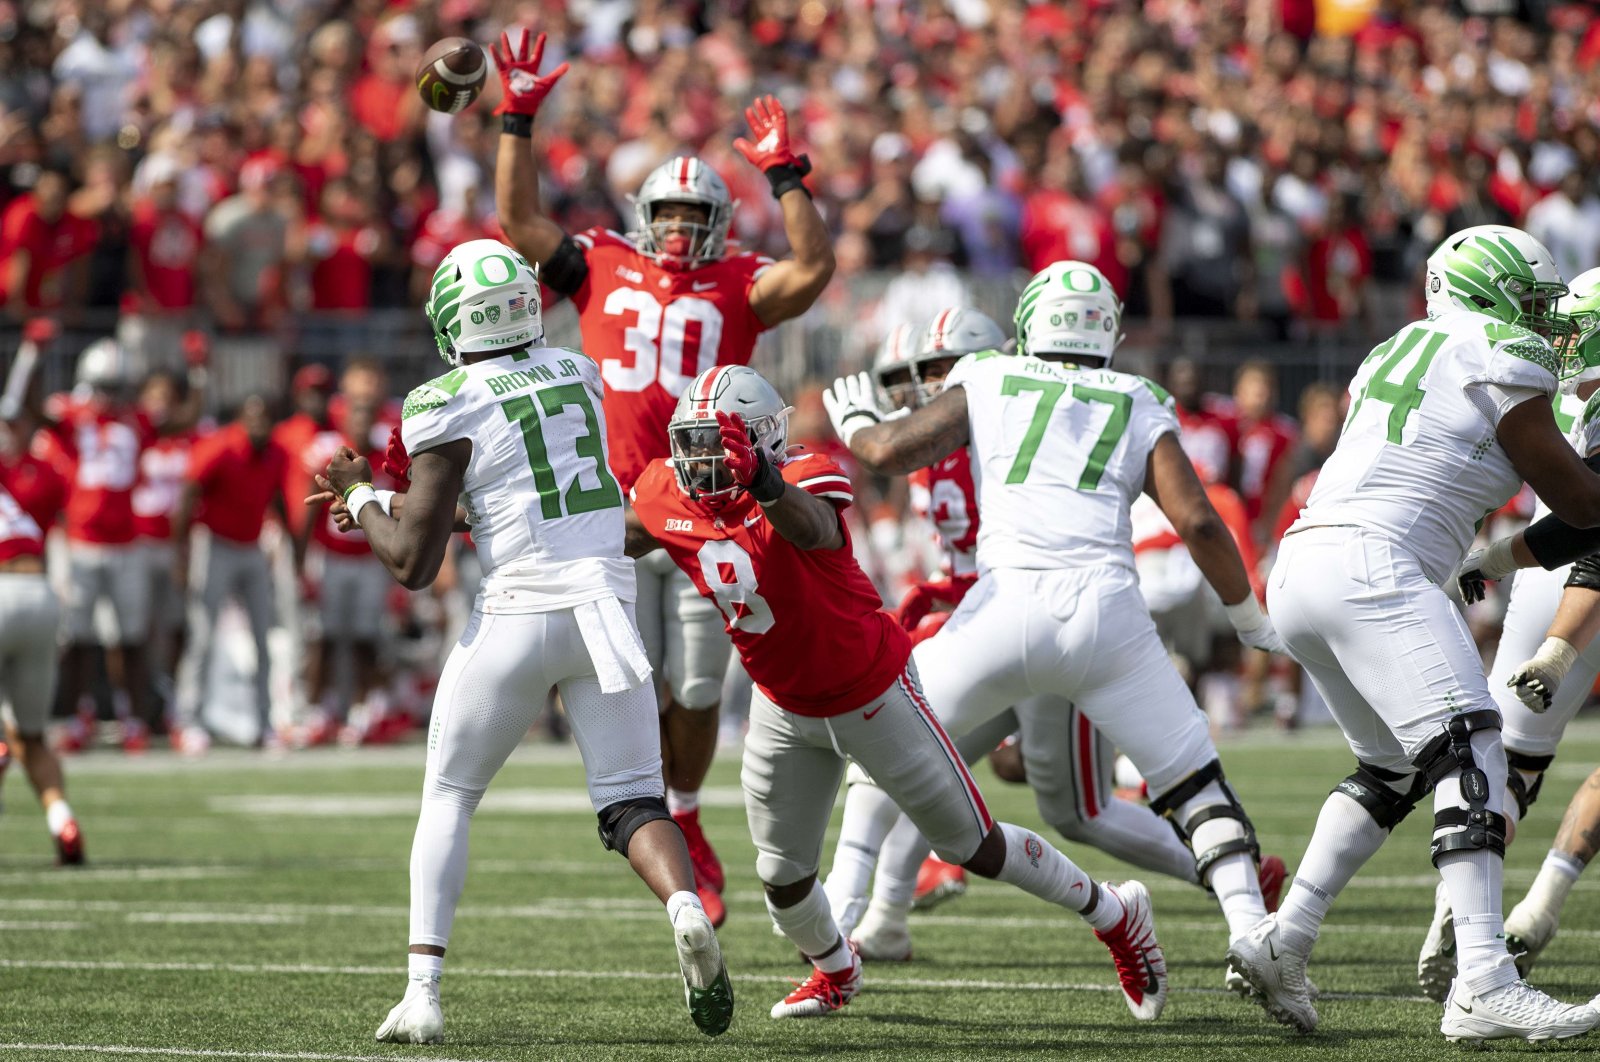 Quarterback Anthony Brown #13 of the Oregon Ducks throws a pass as defensive end Javontae Jean-Baptiste #8 of the Ohio State Buckeyes lunges to block him at Ohio Stadium, Columbus, Ohio, U.S., Sept. 11, 2021. (AFP Photo)